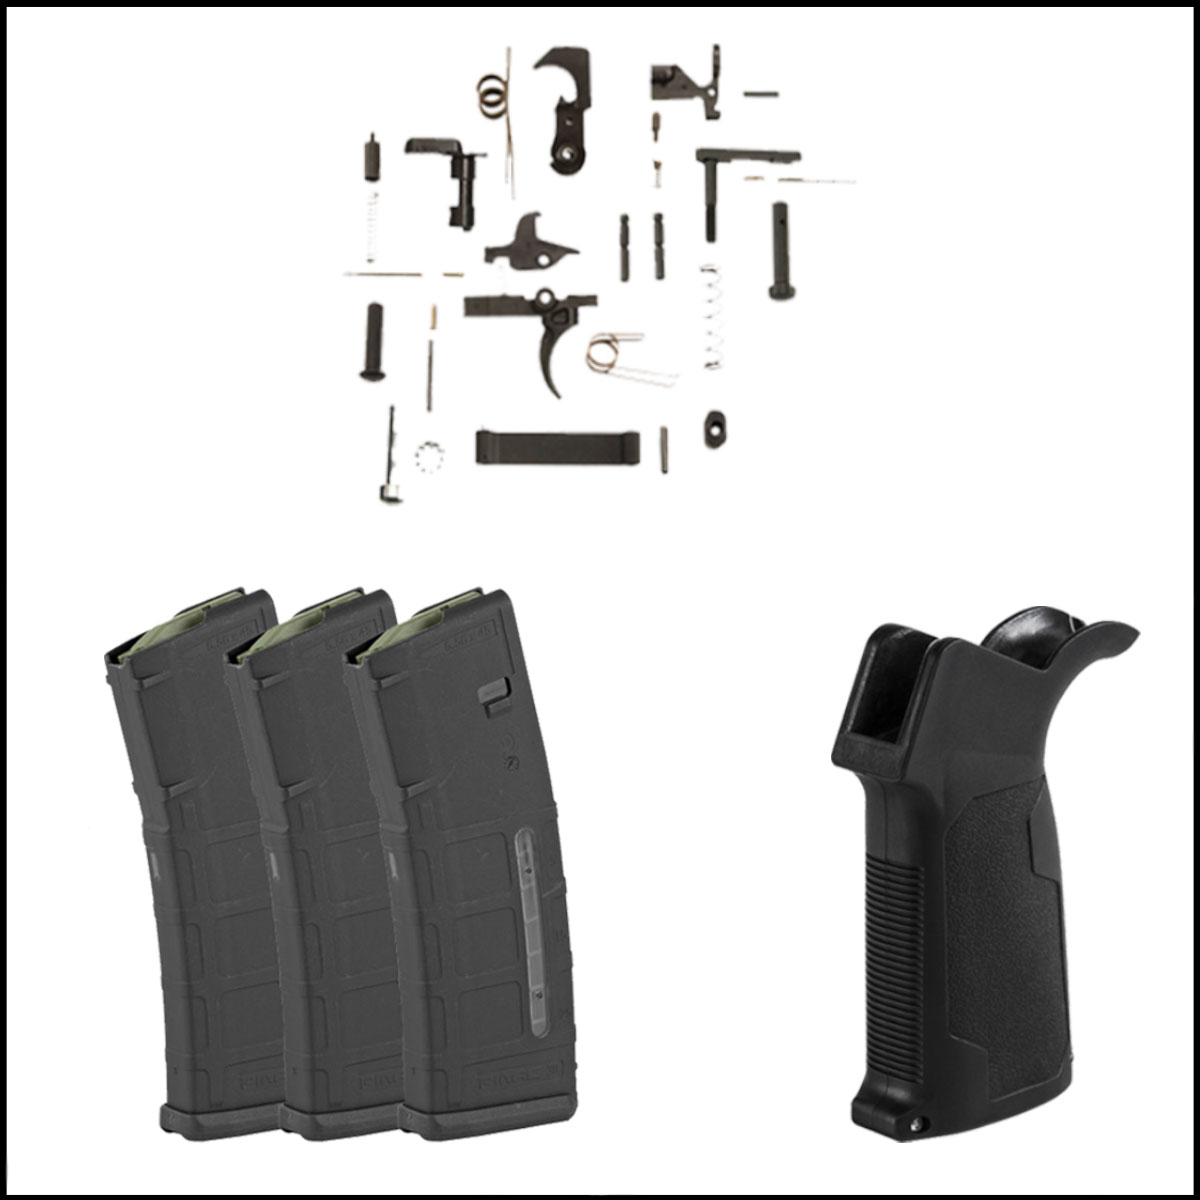 Stocking Stuffer Lower Starting Kits: Magpul Magazine, M2 With Window, 223 Rem/556NATO, 30Rd, 3 - Pack + Recoil Technologies AR-15 Lower Parts Kit + VISM AR-15 M4 Polymer Pistol Grip With Bottom Storage Compartment